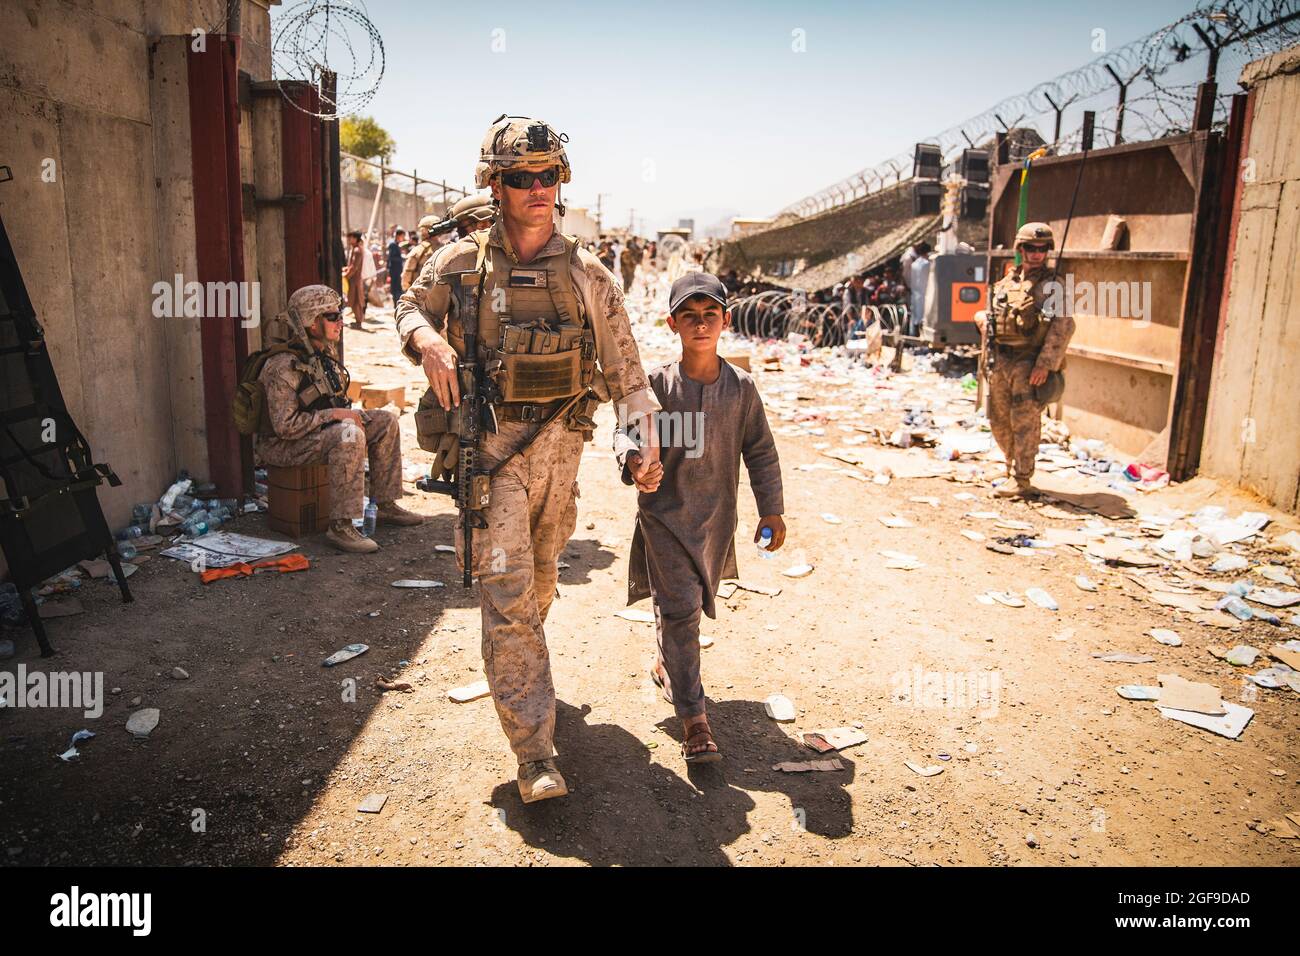 A U.S. Marine with the Special Purpose Marine Air-Ground Task Force-Crisis Response-Central Command (SPMAGTF-CR-CC) escorts a kid to his family during an evacuation at Hamid Karzai International Airport, Kabul, Afghanistan, Aug. 24. U.S. service members and coalition forces are assisting the Department of State with a non-combatant evacuation operation (NEO) in Afghanistan. (U.S. Marine Corps photo by Staff Sgt. Victor Mancilla) Stock Photo